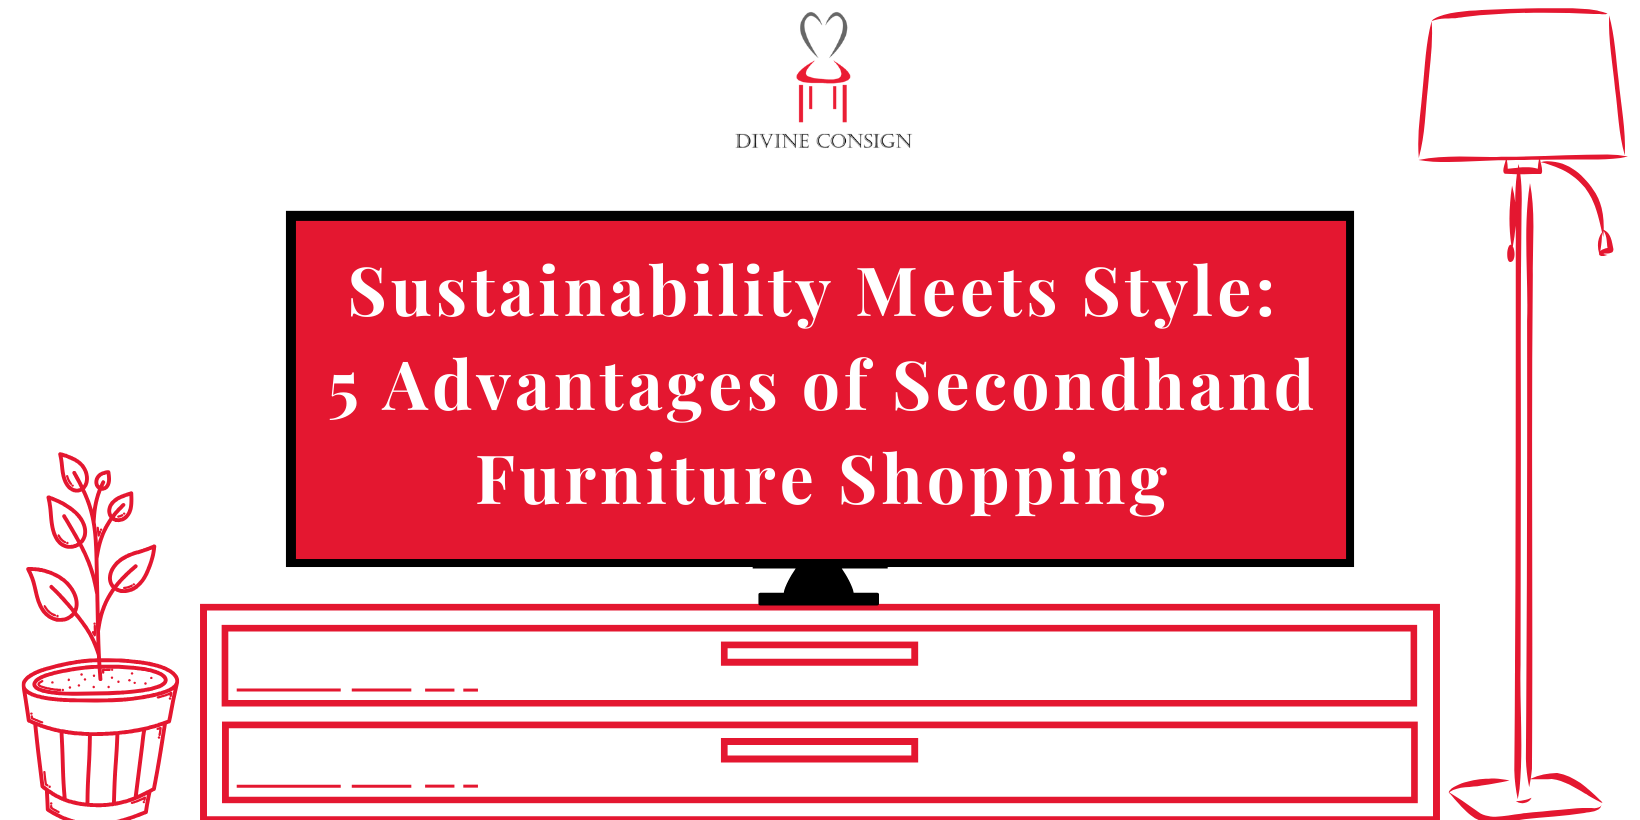 Sustainability Meets Style: 5 Advantages of Secondhand Furniture Shopping